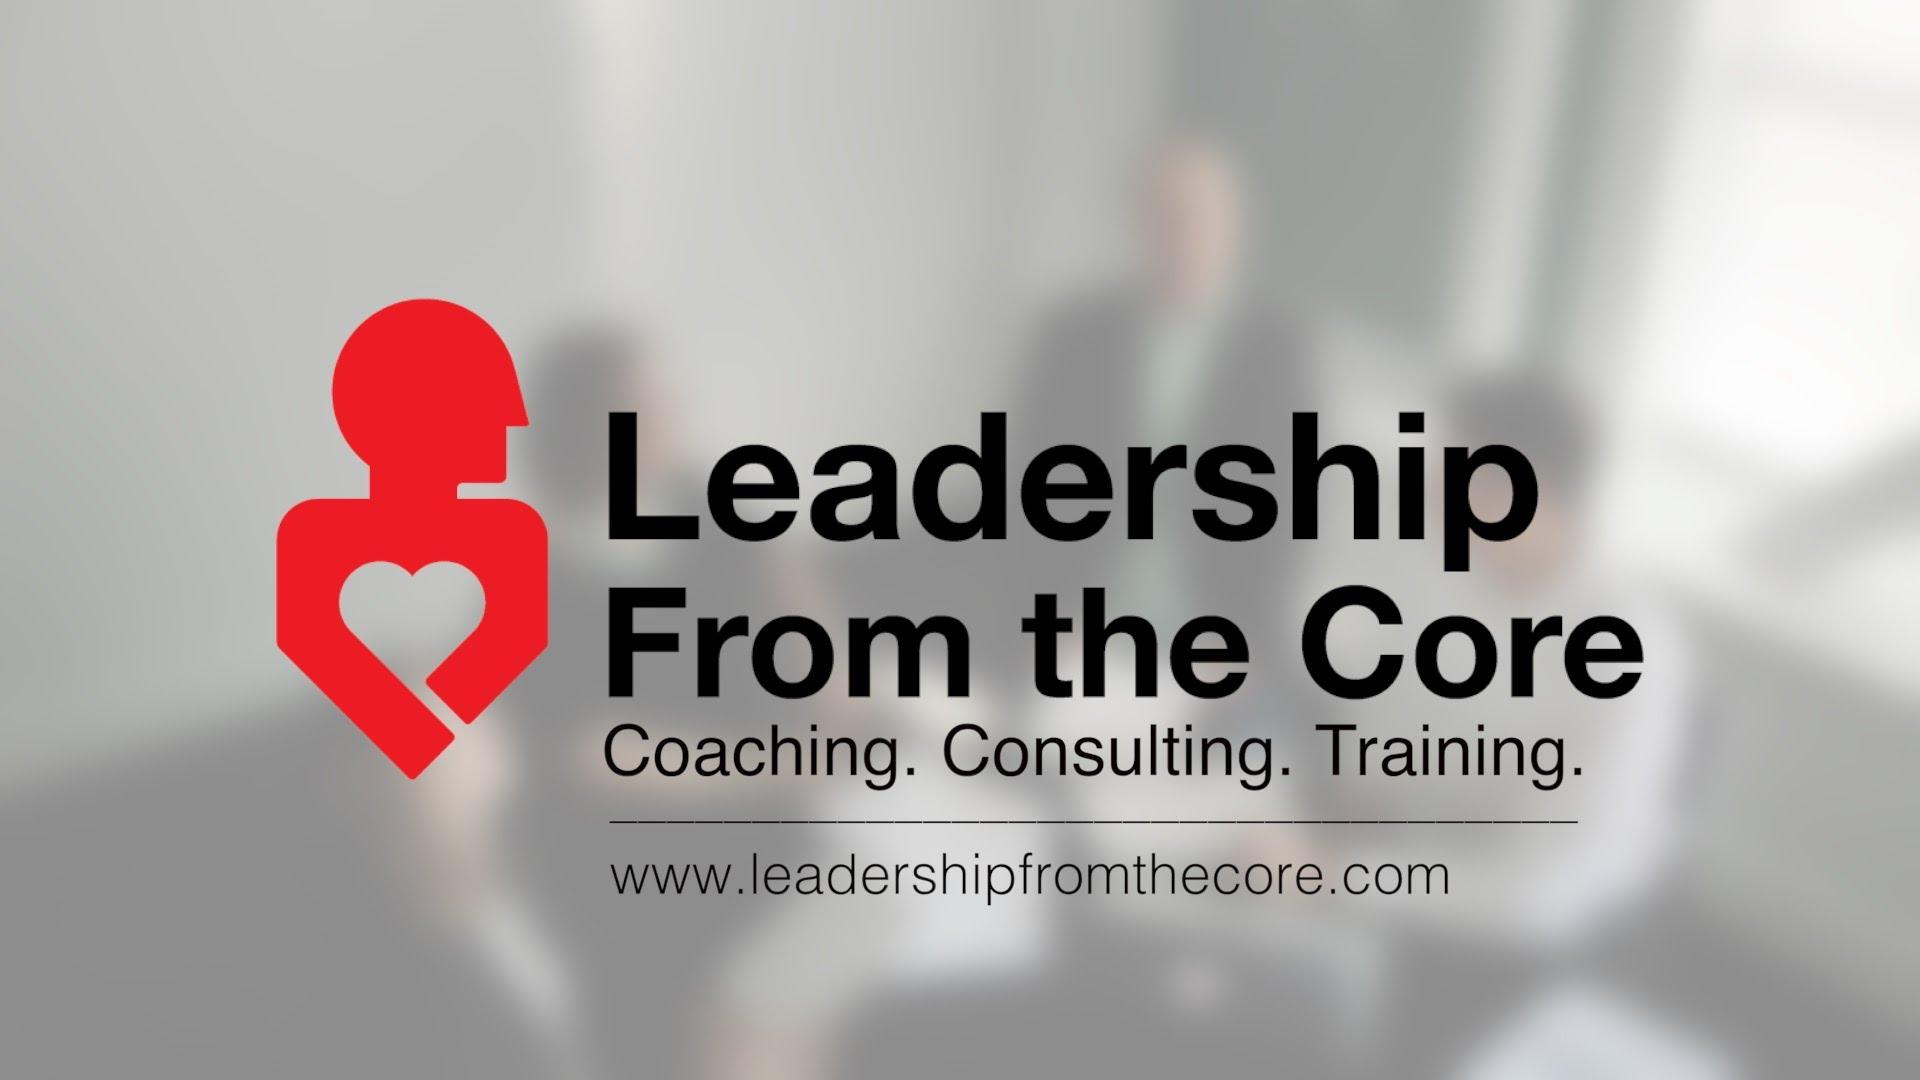 Leadership From the Core